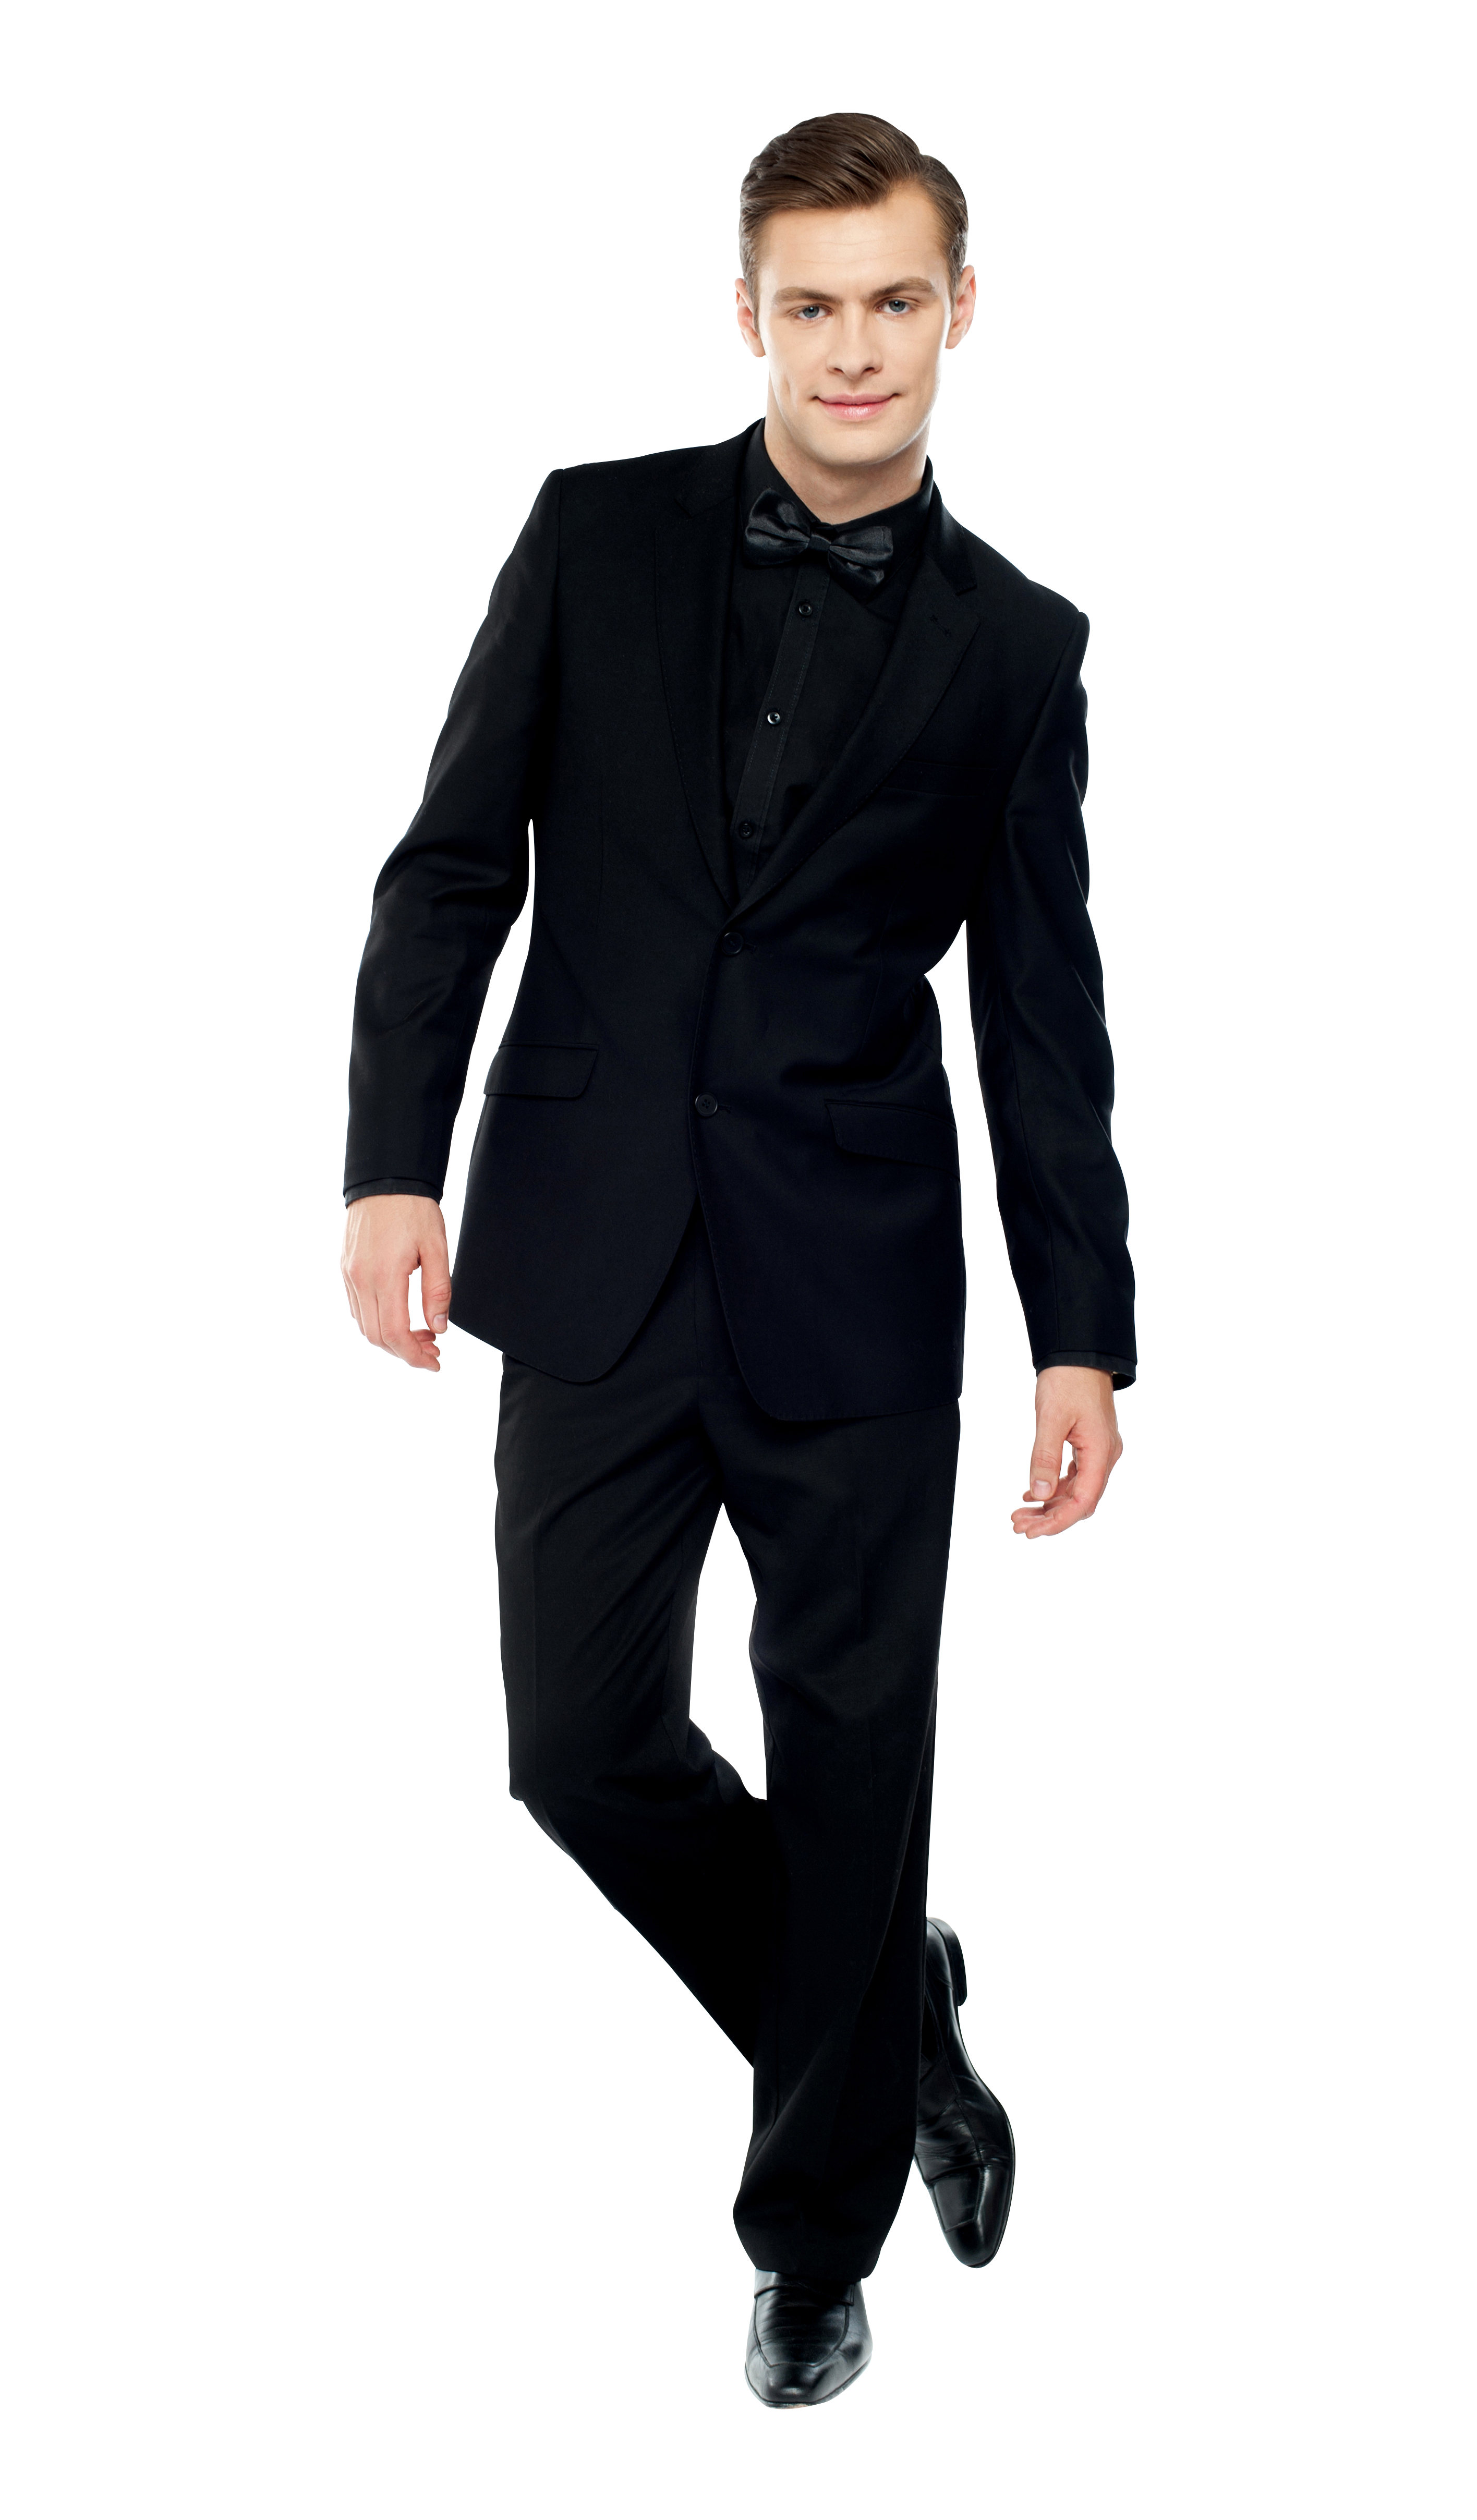 Men In Suit Hd Free Png Image - Man, Transparent background PNG HD thumbnail